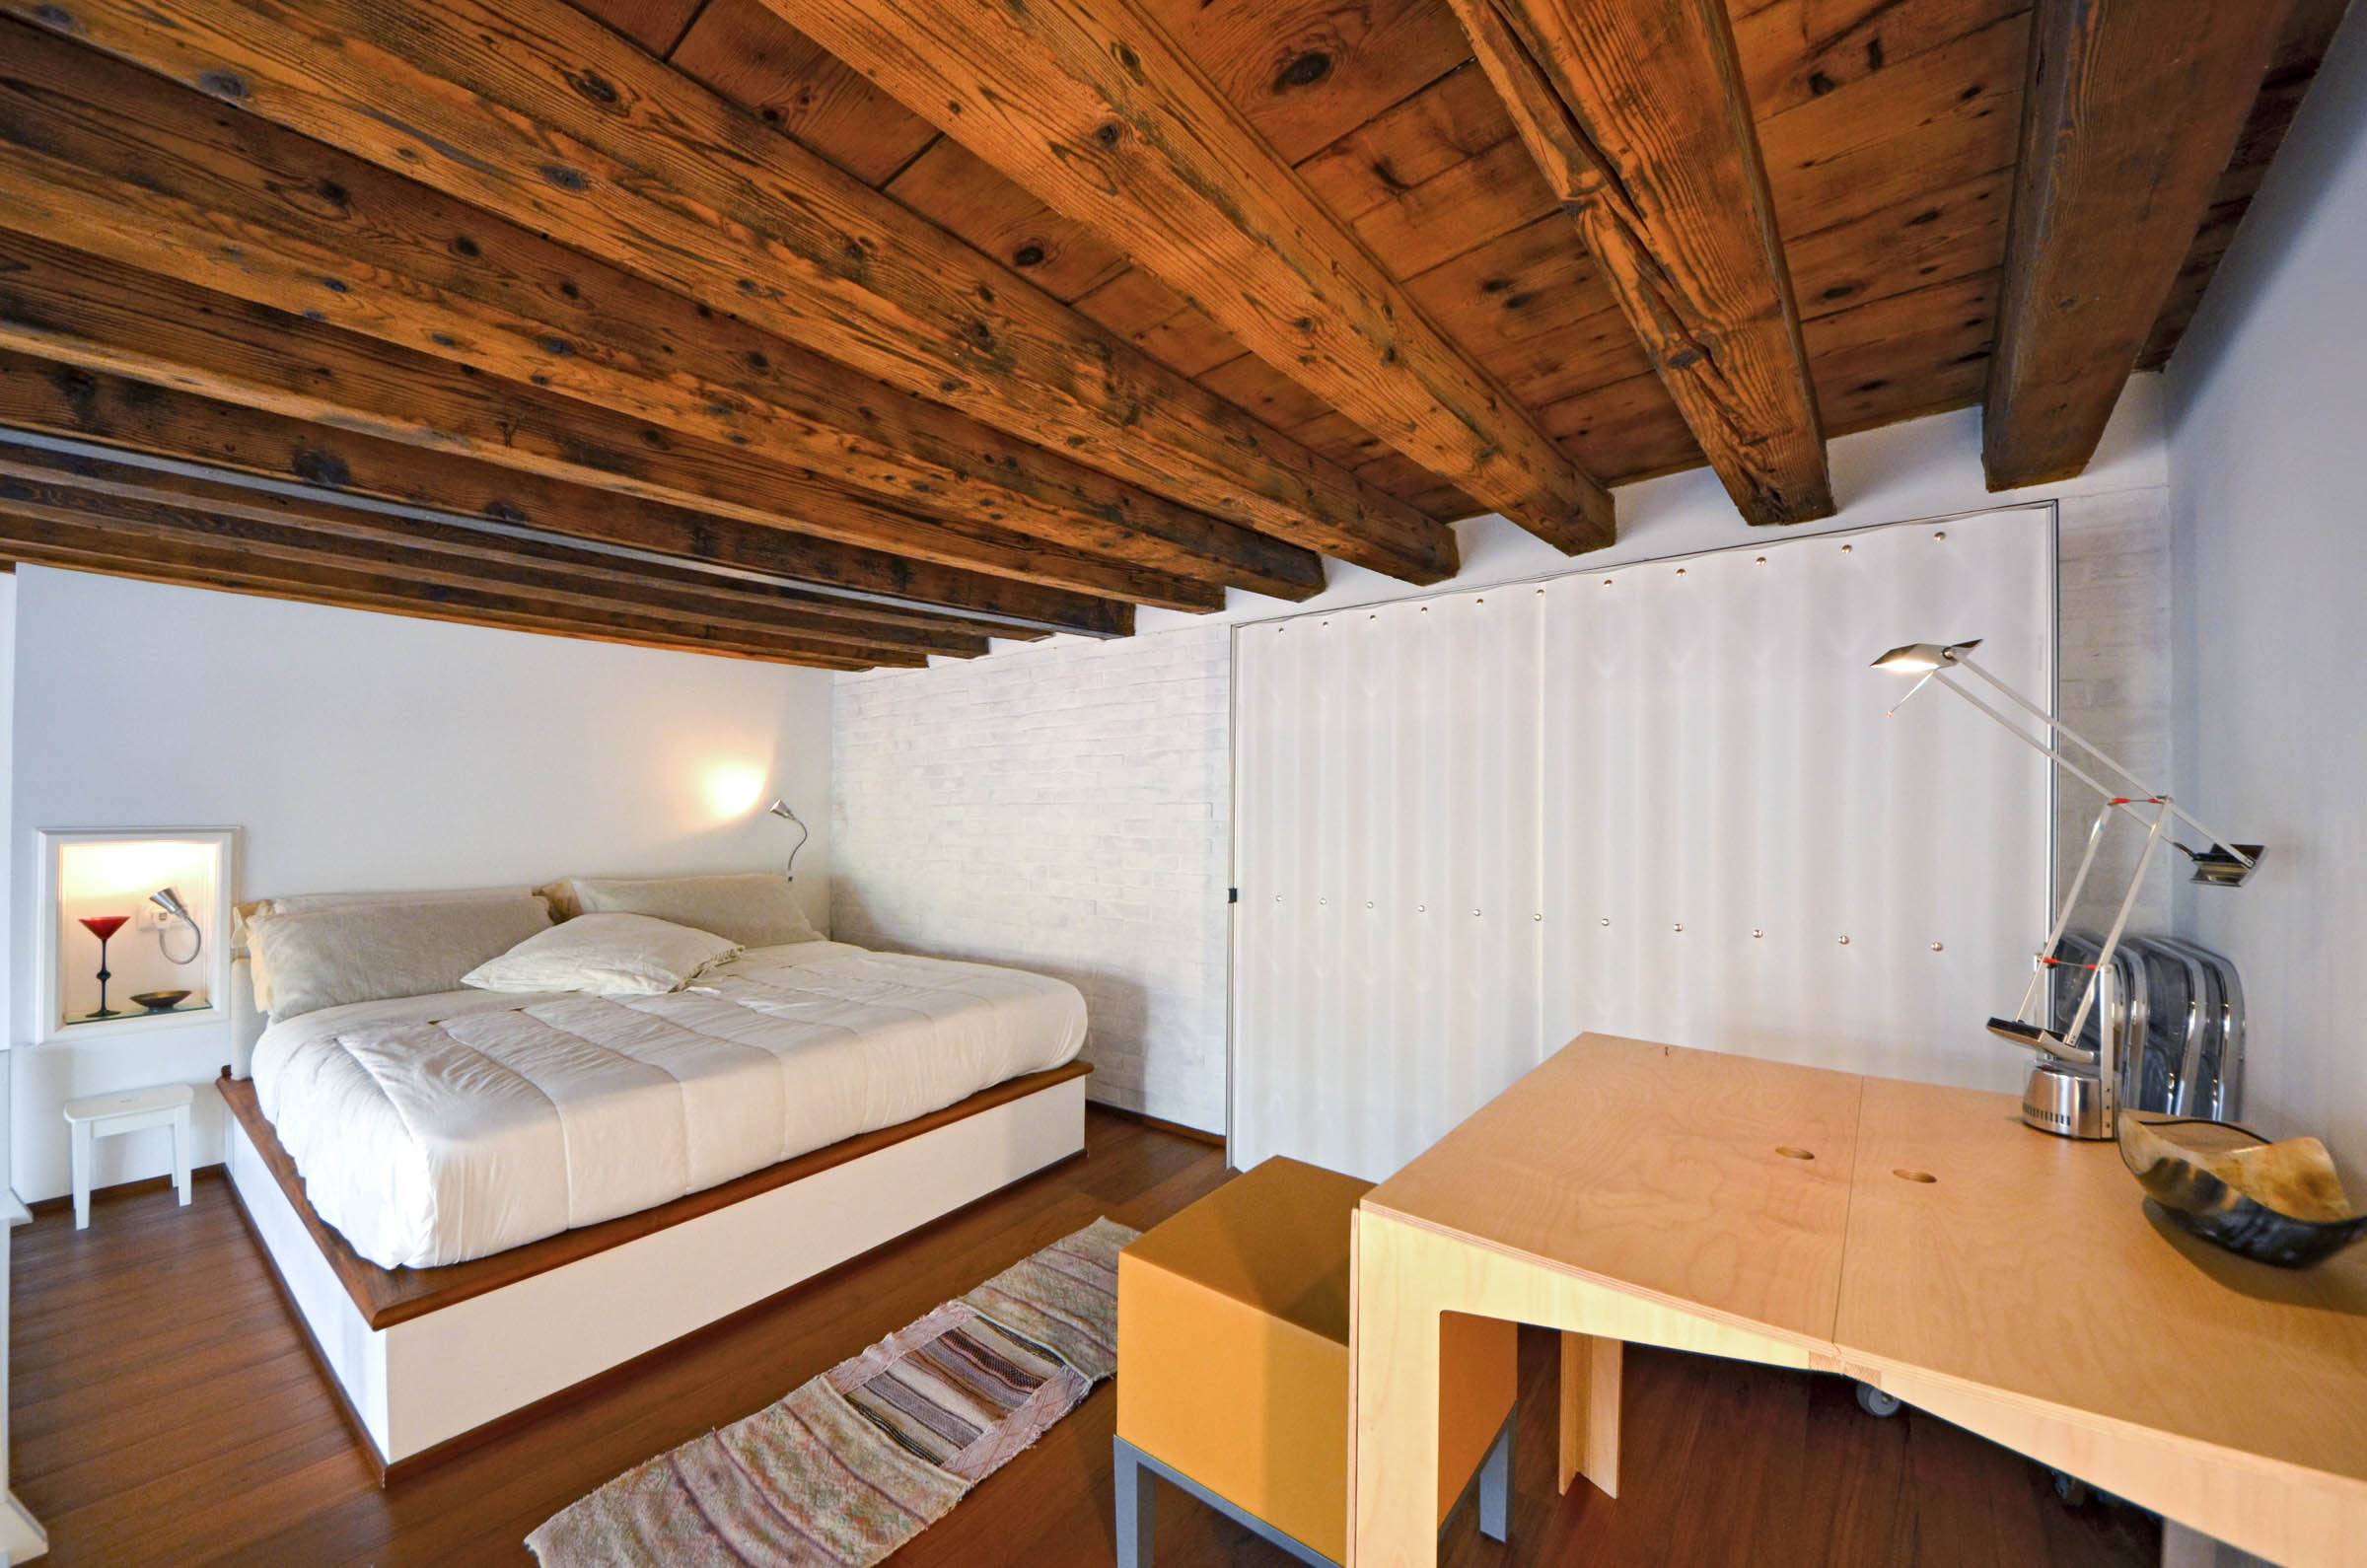 spacious bedroom in the gallery, the height of the wooden beams is 185 cm